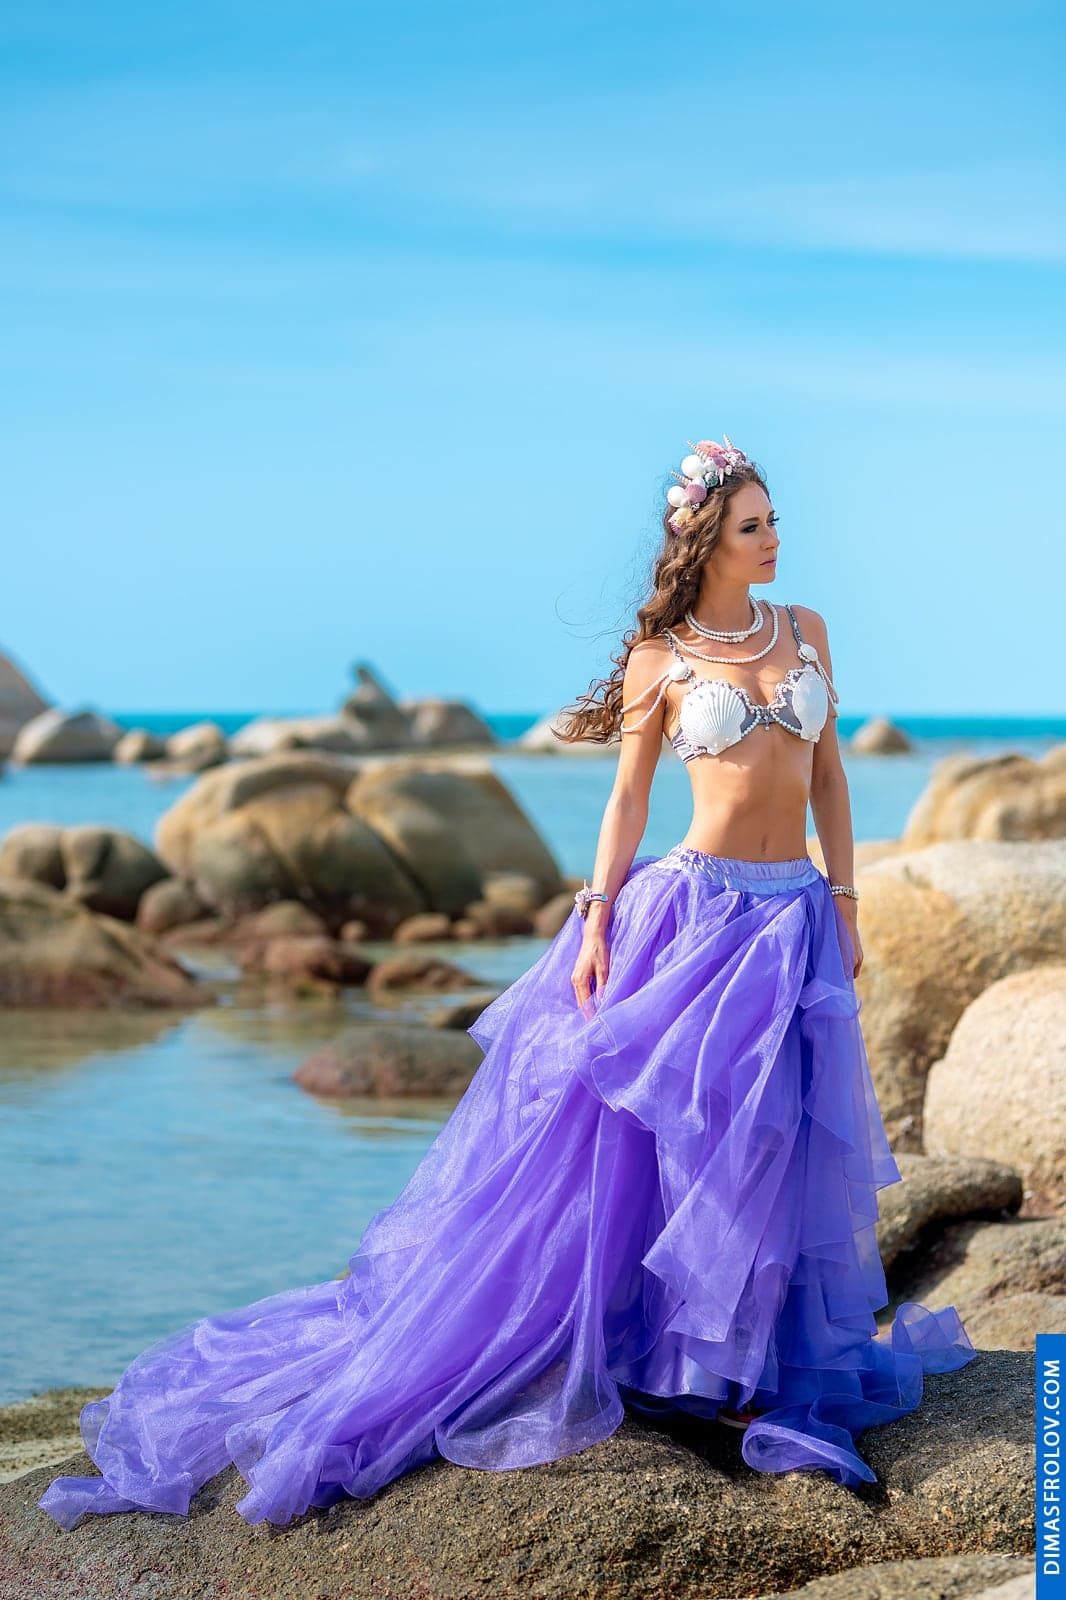 Unique shell accessories for a themed photo shoot on Koh Samui. photographer Dimas Frolov. photo1589